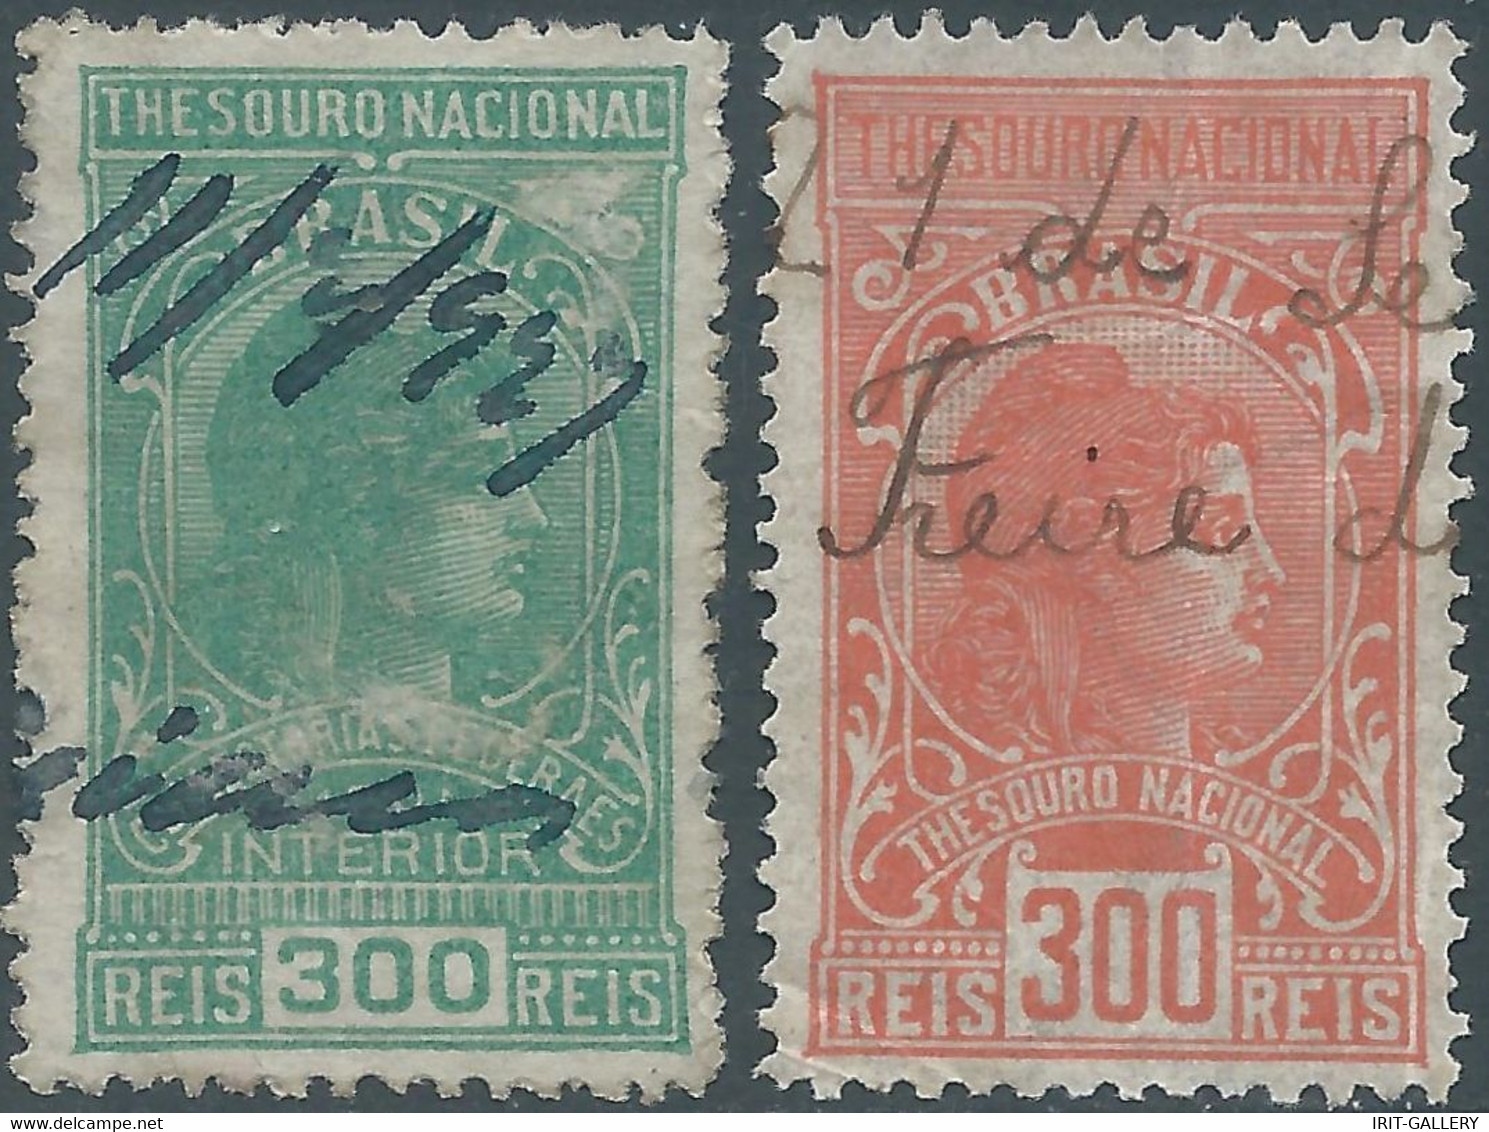 Brasil - Brasile - Brazil,Revenue Stamp Tax Fiscal,2x 300R,Used - Officials